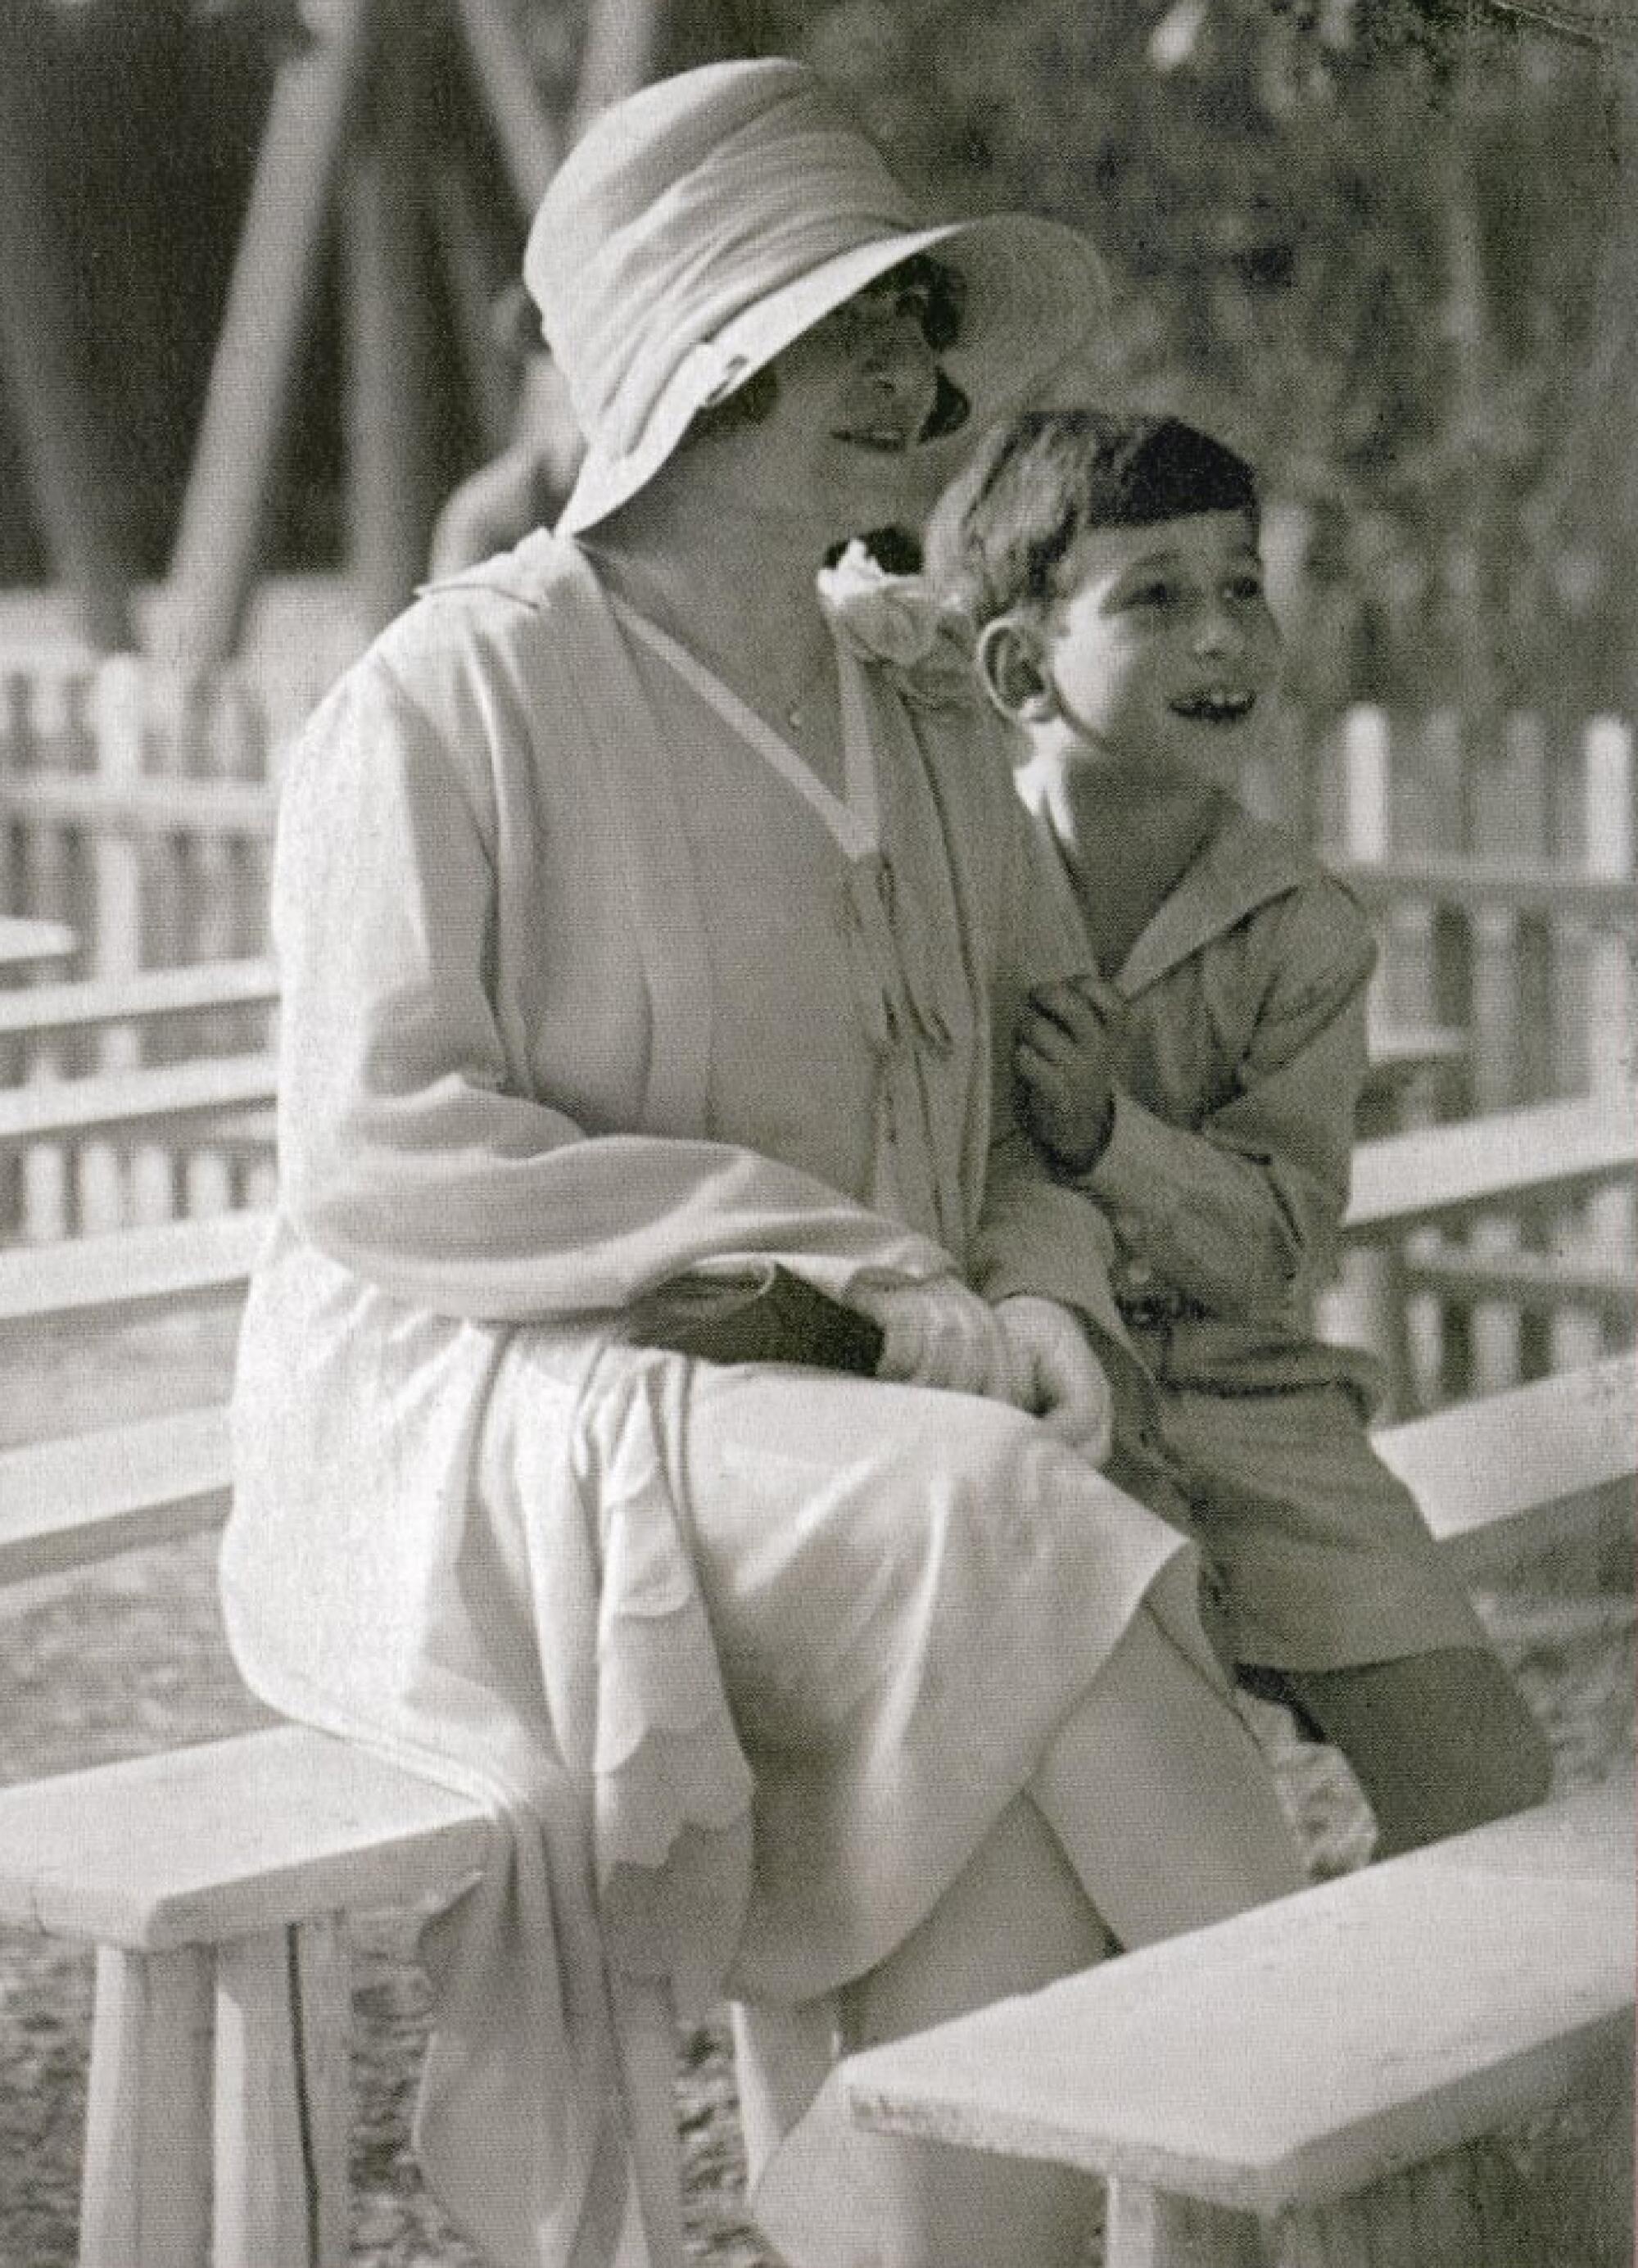 A photo provided by the family of Claude Cassirer as a young boy with his grandmother, 